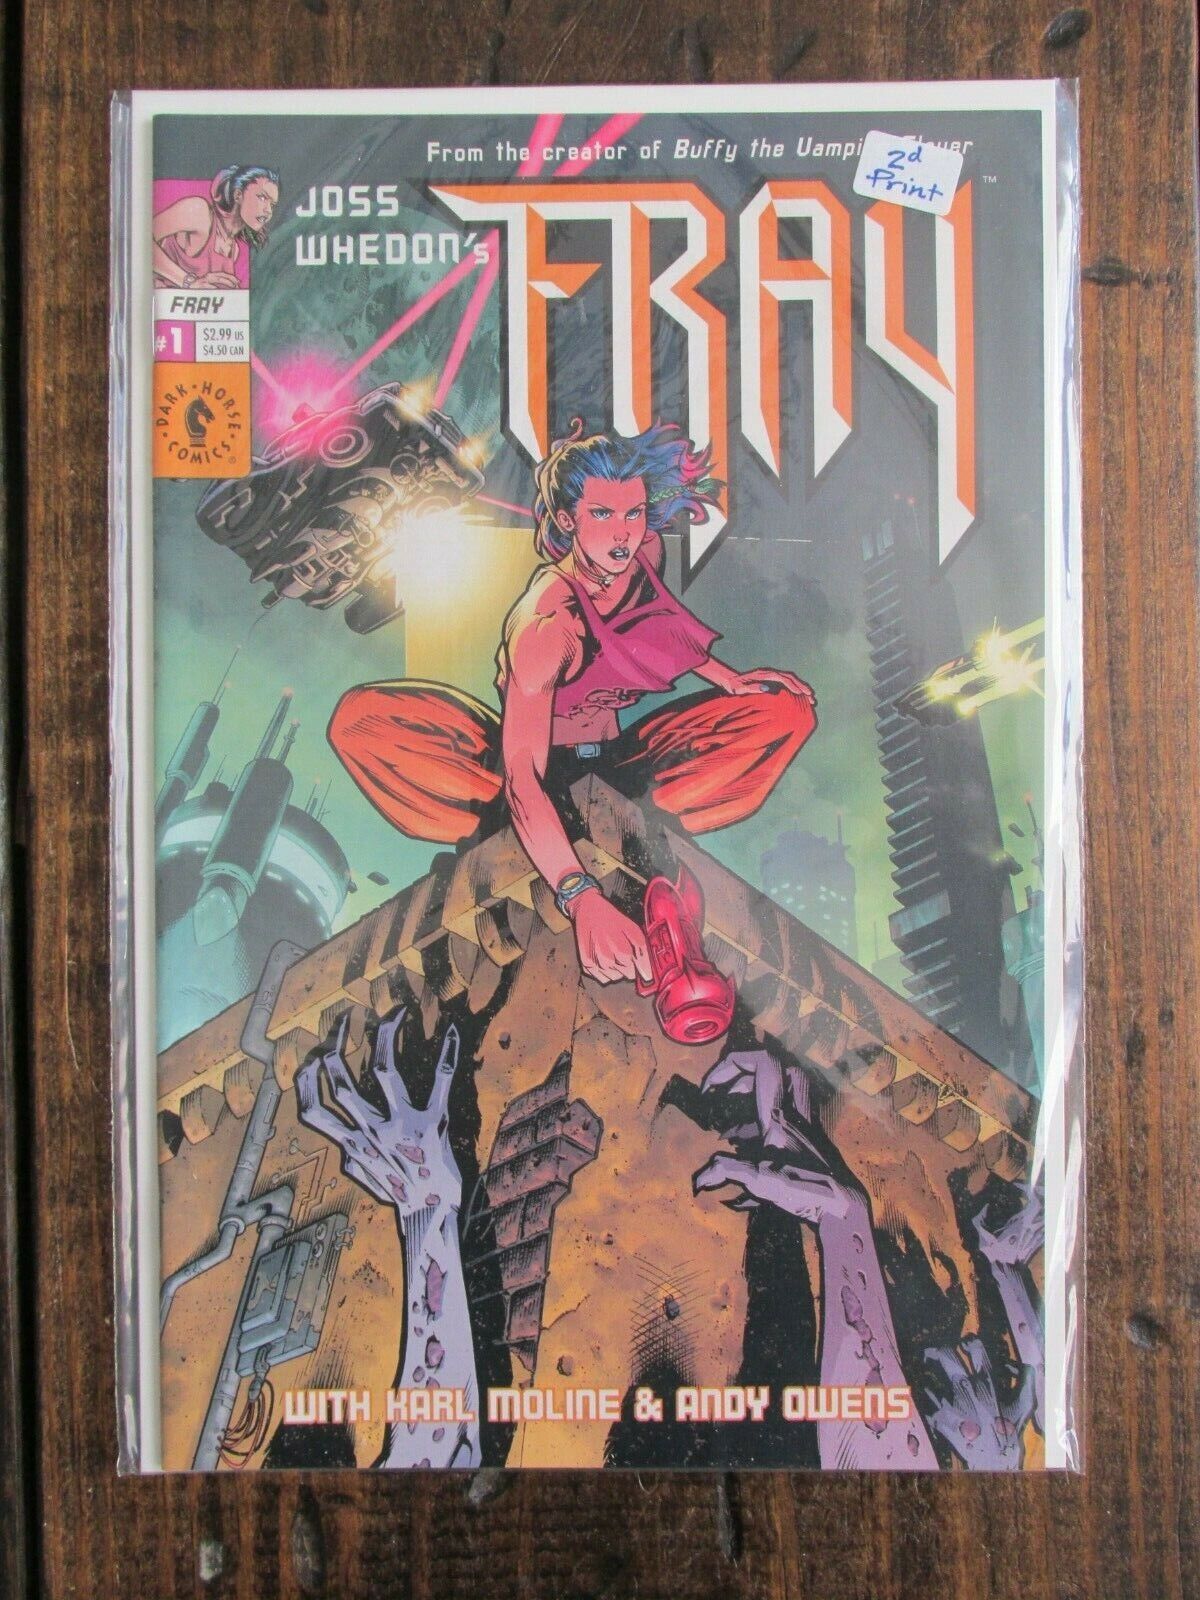 Dark Horse 2001 2002 FRAY Pick Your Issue 1 2 4 7 8 Complete Your Set $1.95 Each